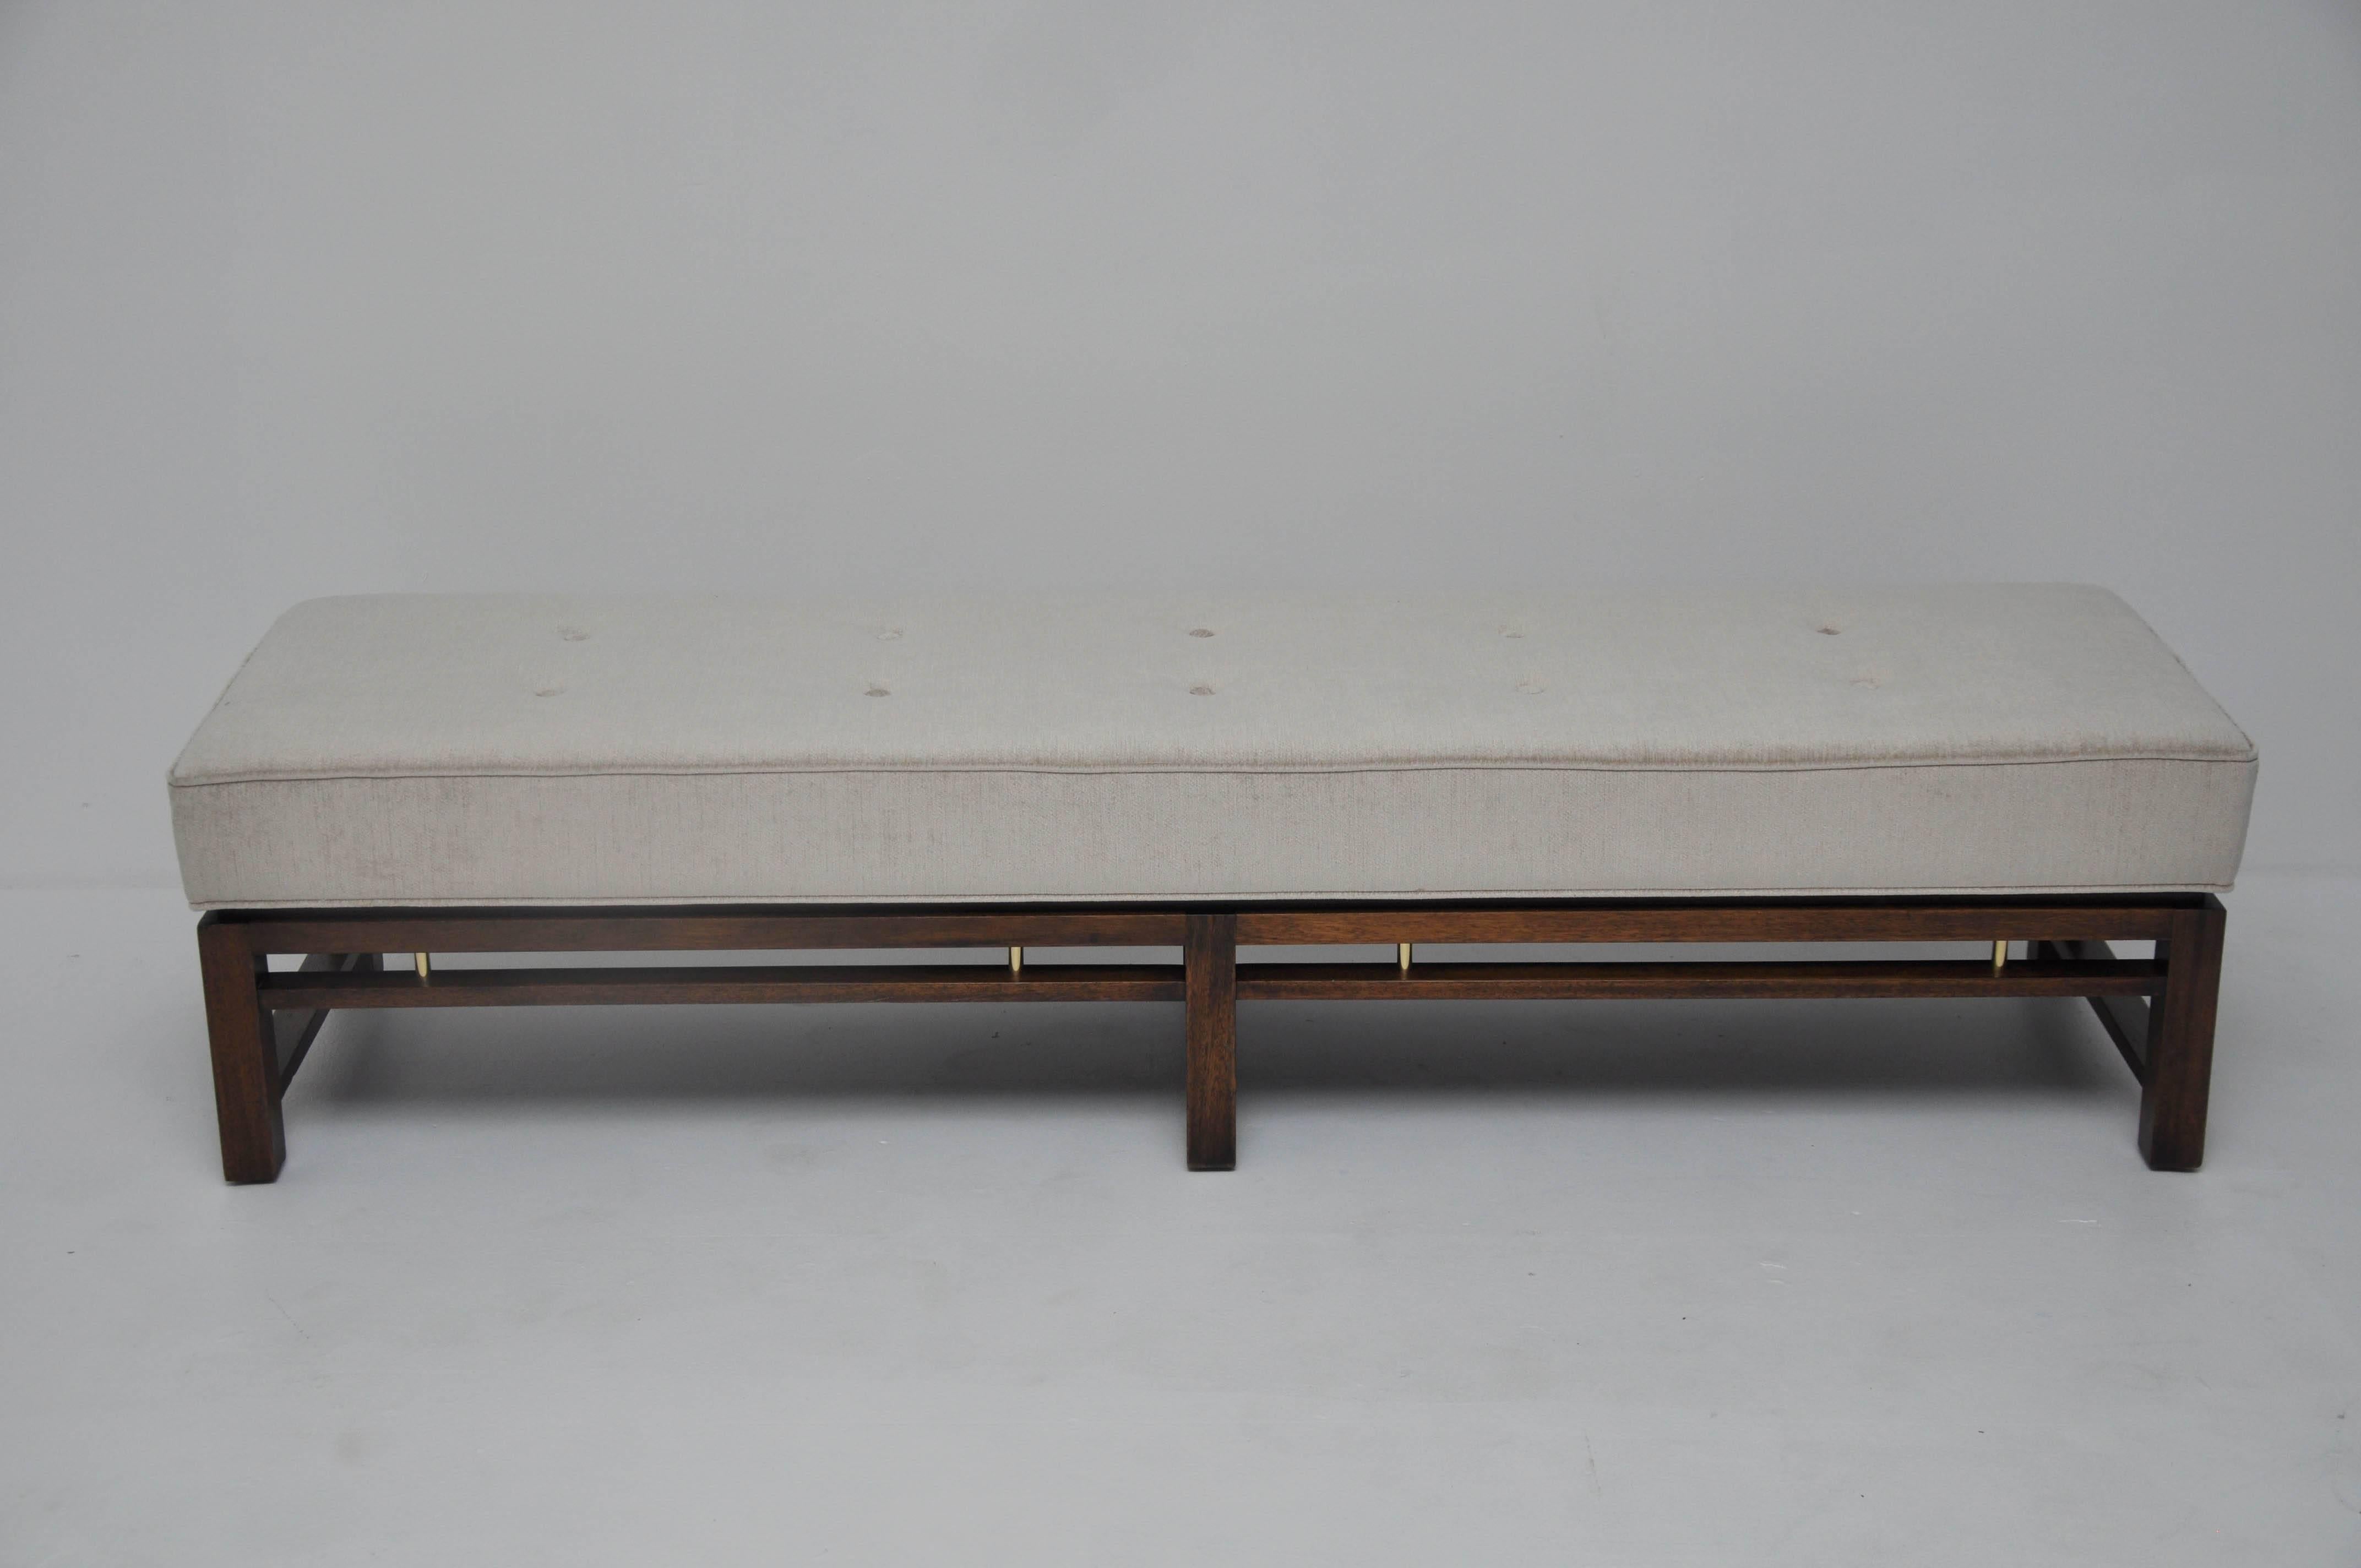 Bench by Edward Wormley for Dunbar. Mahogany frame with brass details. Newly upholstered.